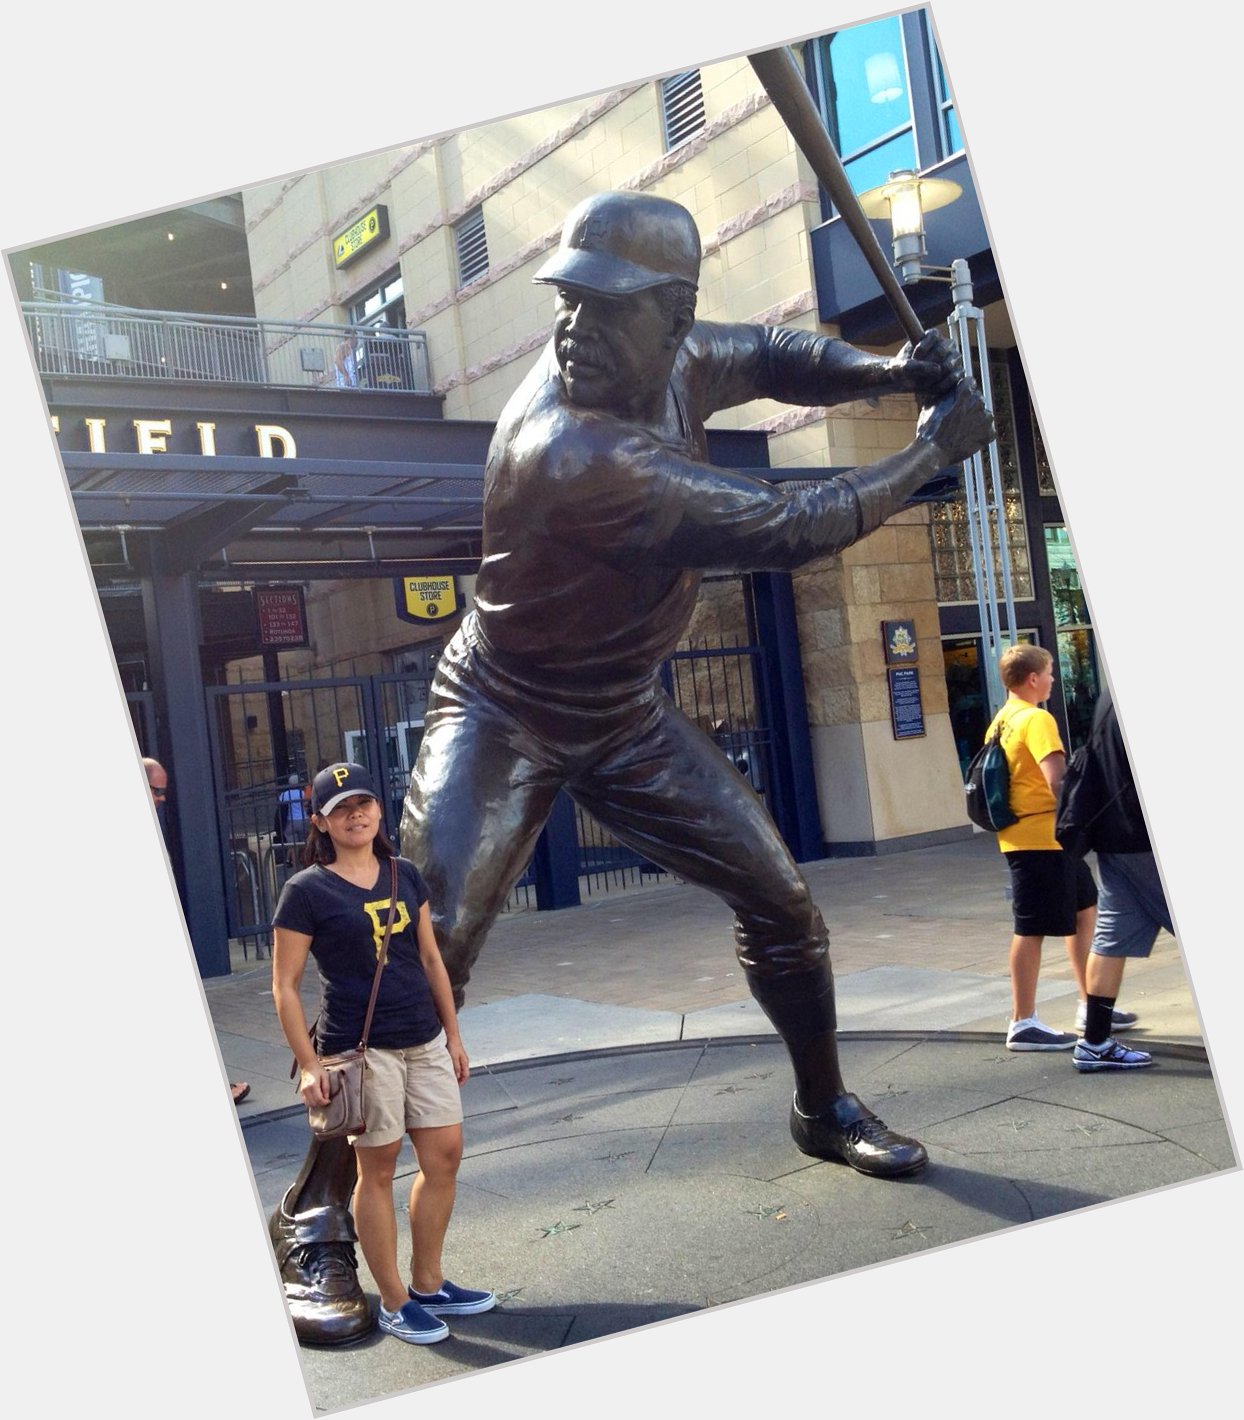 Happy Birthday Pops! next to the Willie Stargell statue. Can\t wait for baseball! 